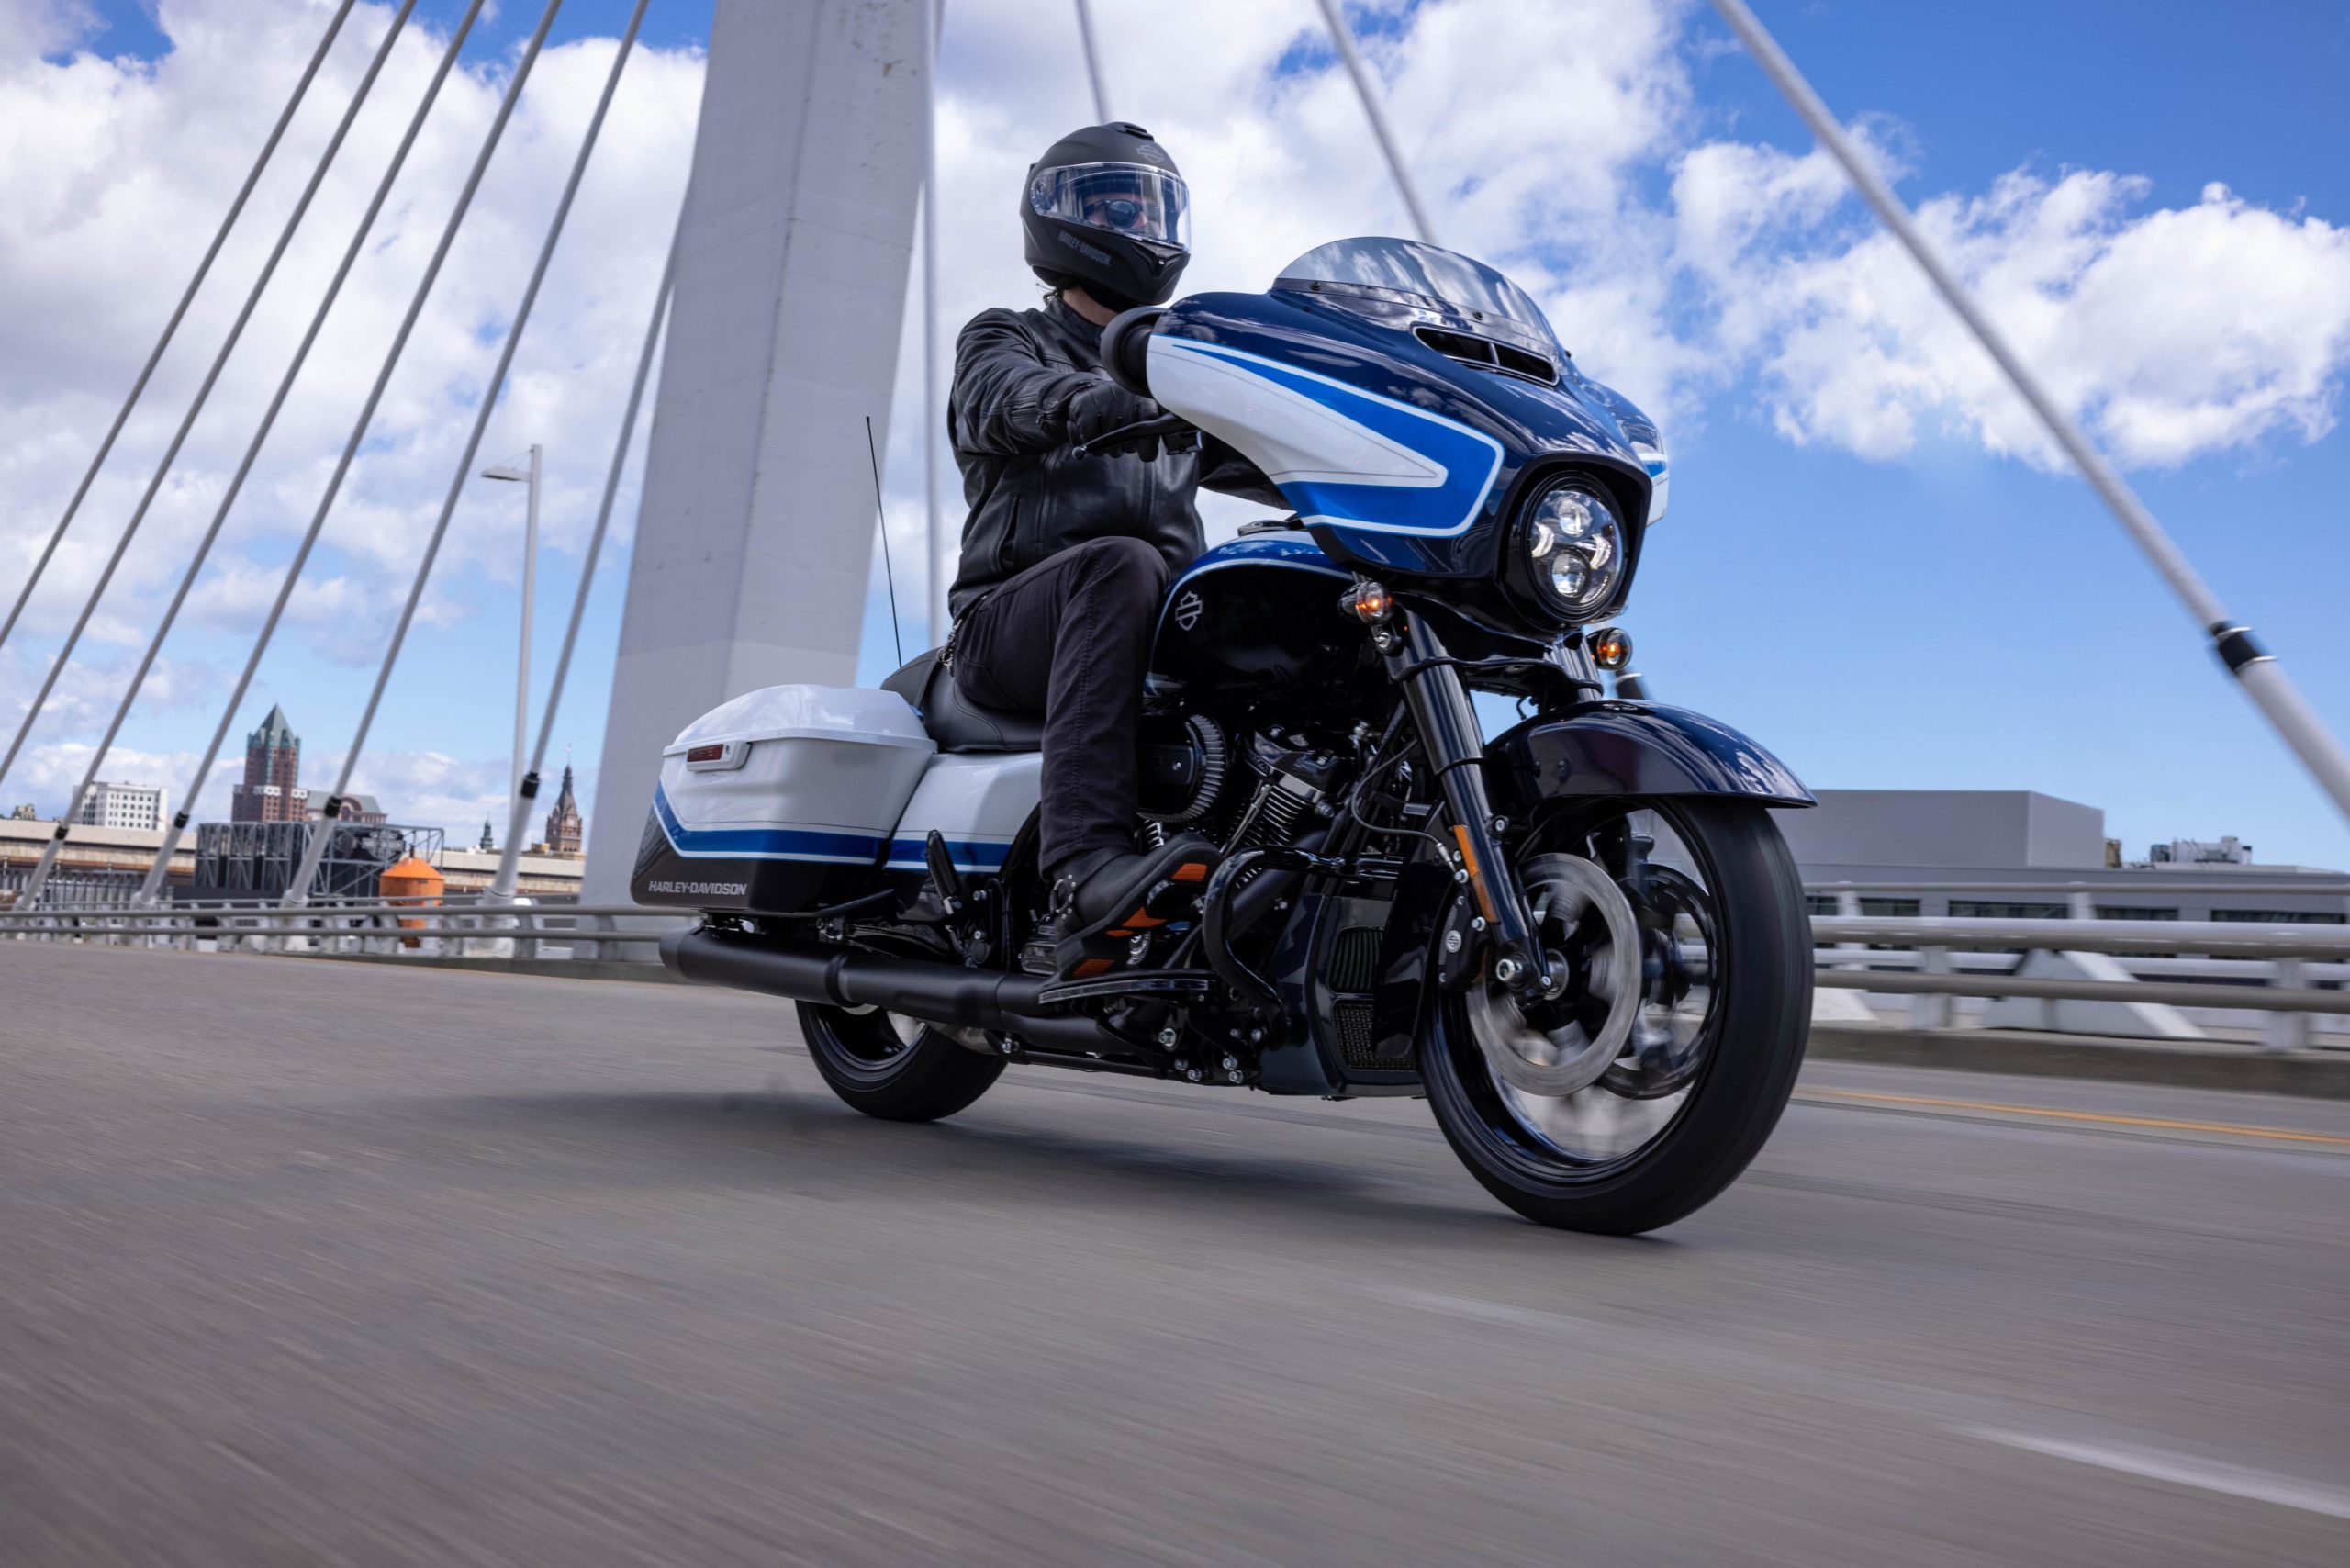 a side view of a rider trying out the all-new 2021 Harley Davidson Street Glider hot-rod bagger in a limited edition Arctic Blast paint job, completed by Gunslinger Custom Paint